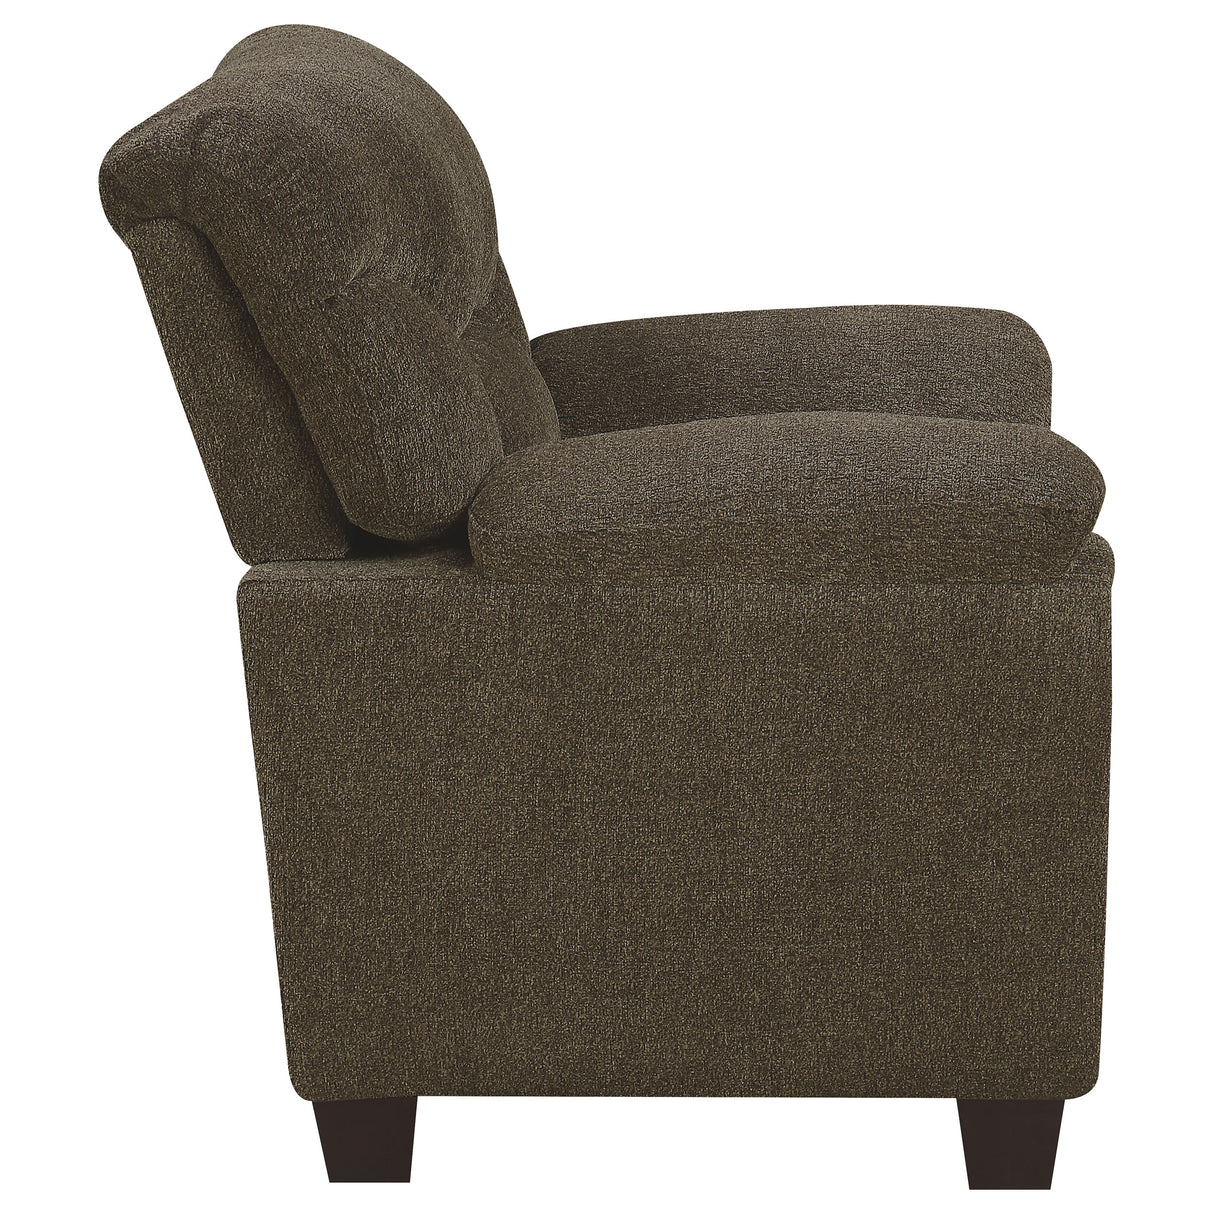 Chair - Clementine Upholstered Chair with Nailhead Trim Brown